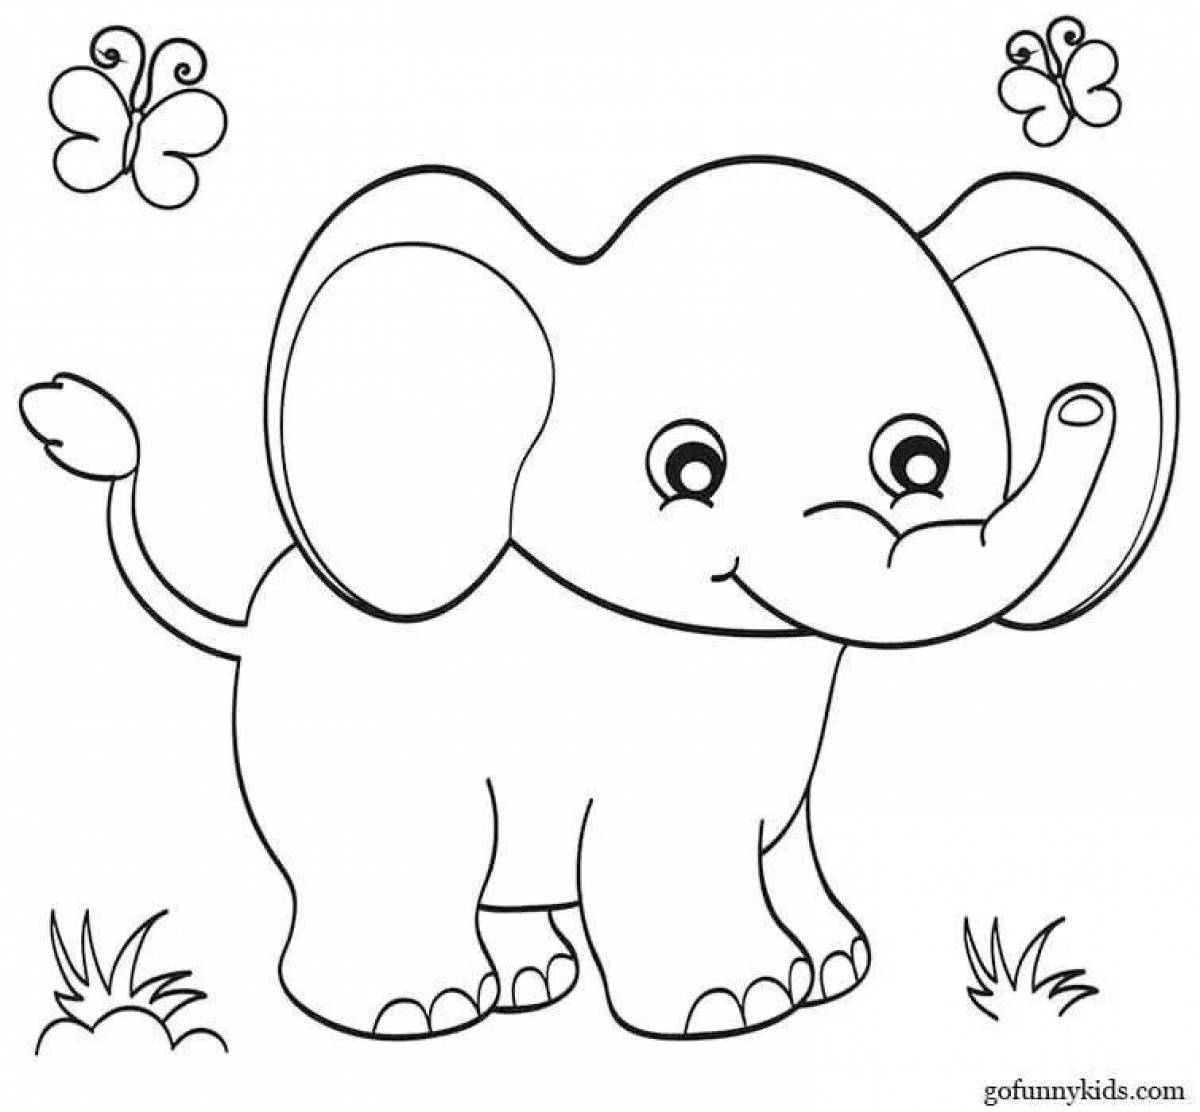 Adorable elephant coloring page for 3-4 year olds